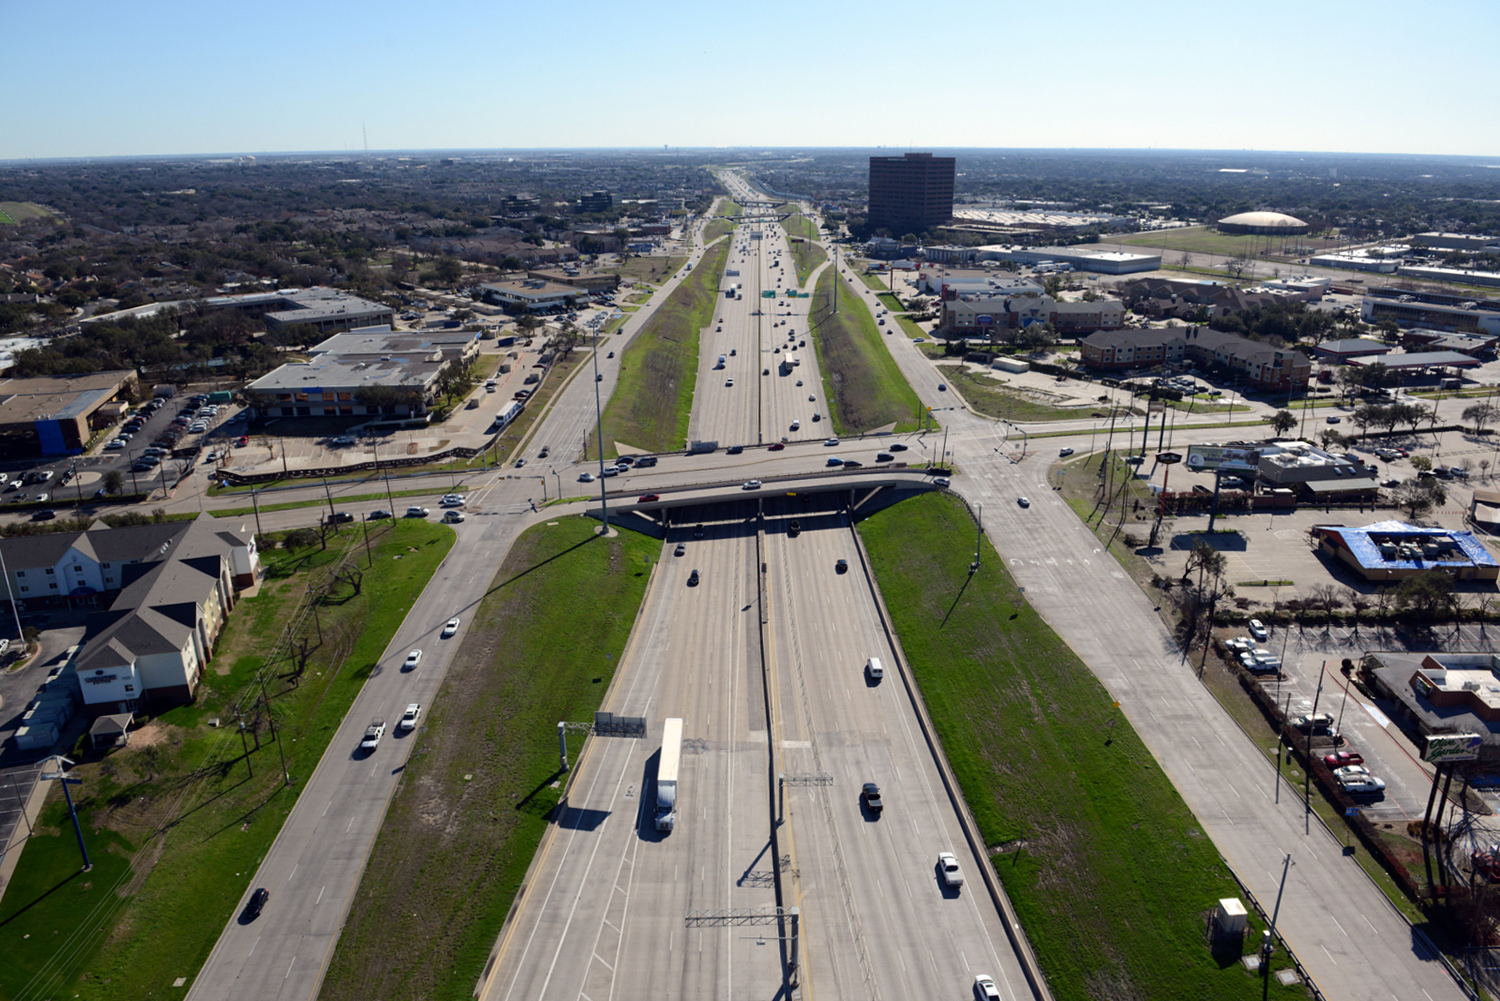 635E at Greenville aerial view